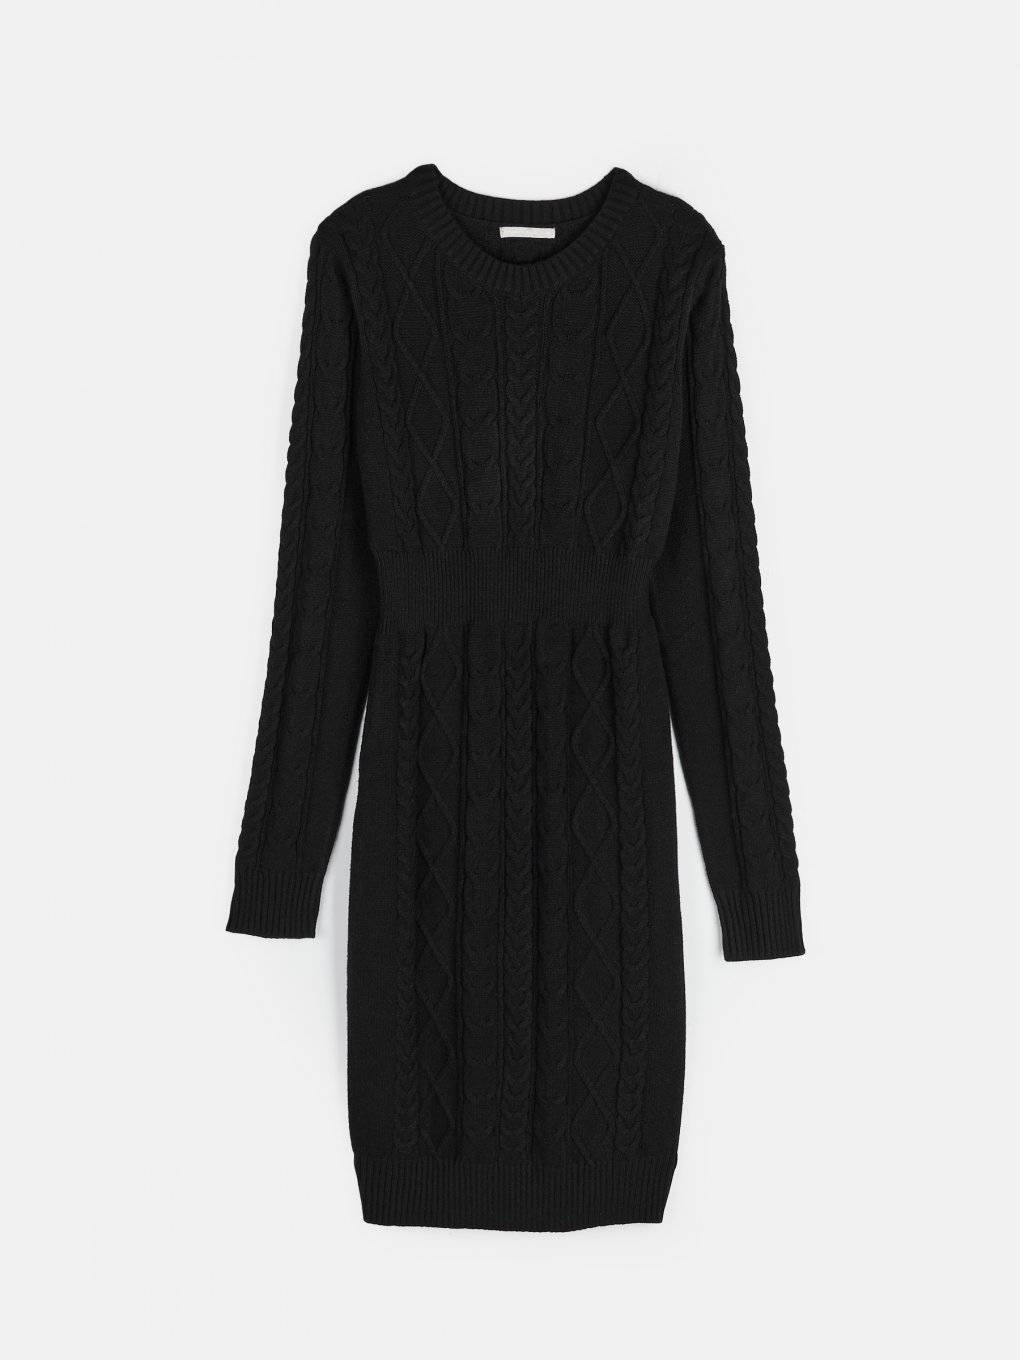 Ladies knitted dress